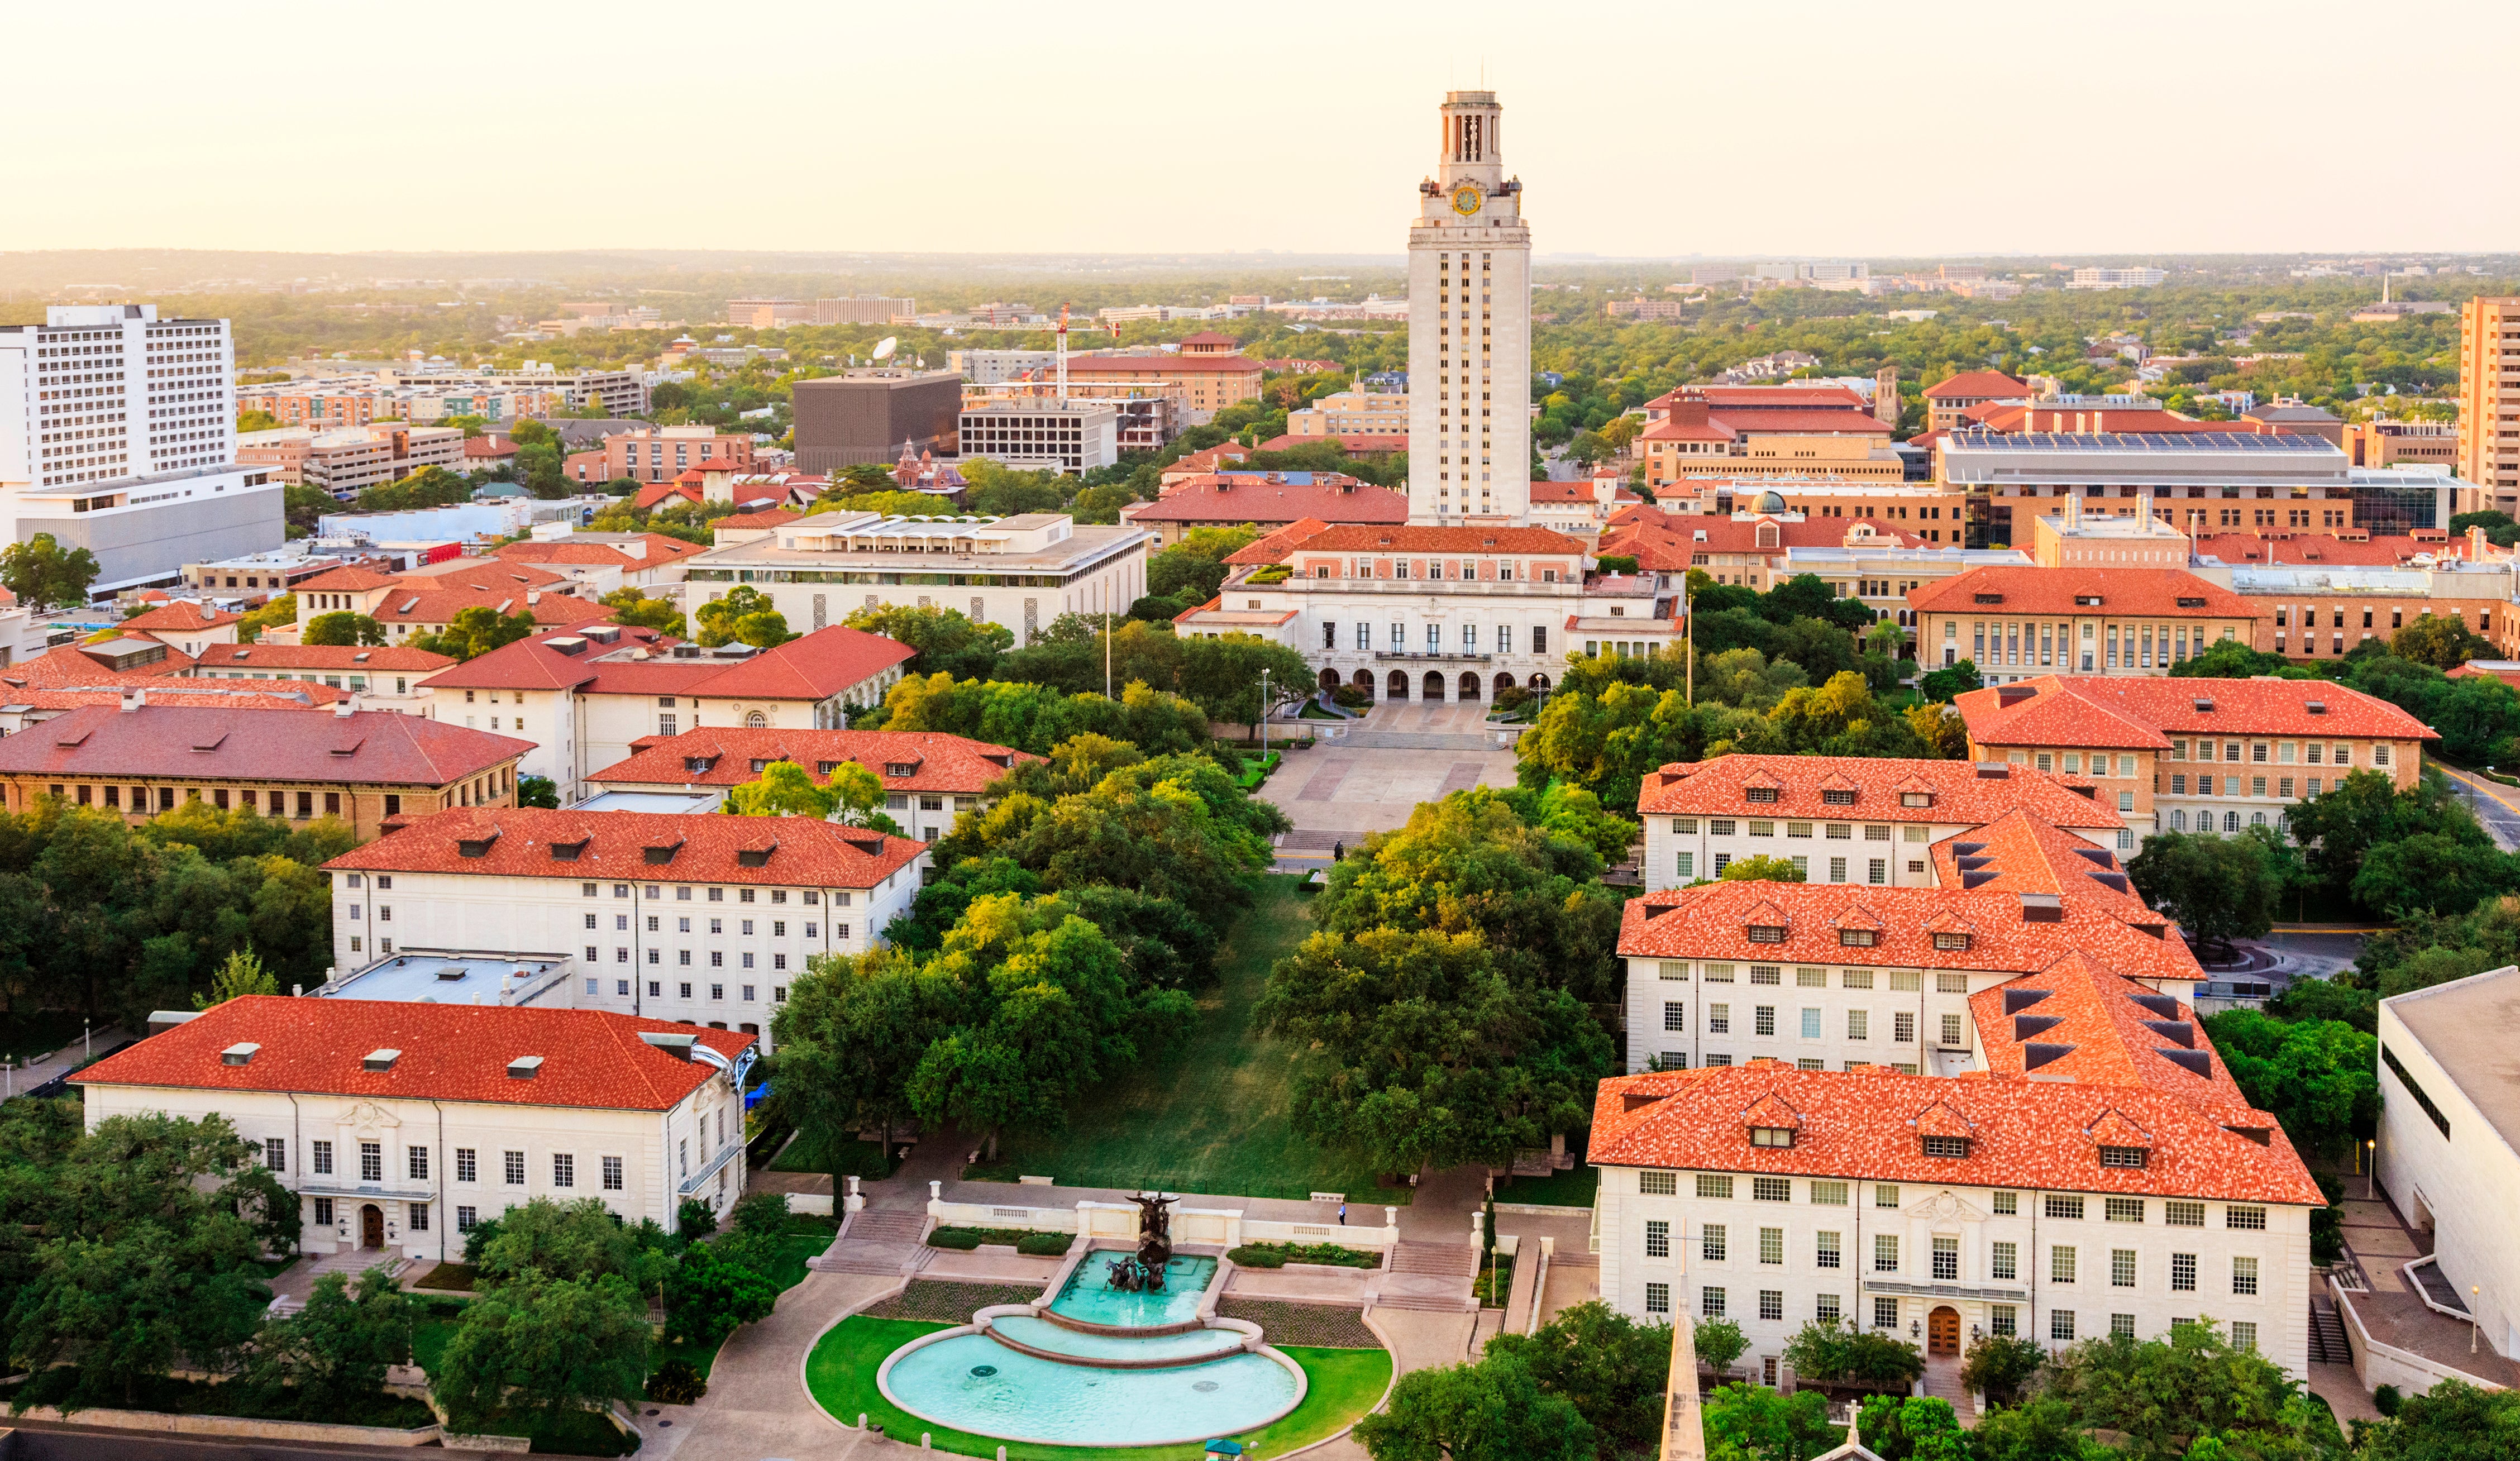 Students at University of Texas Austin have been battling with the administration over what they believe to be a racist school song